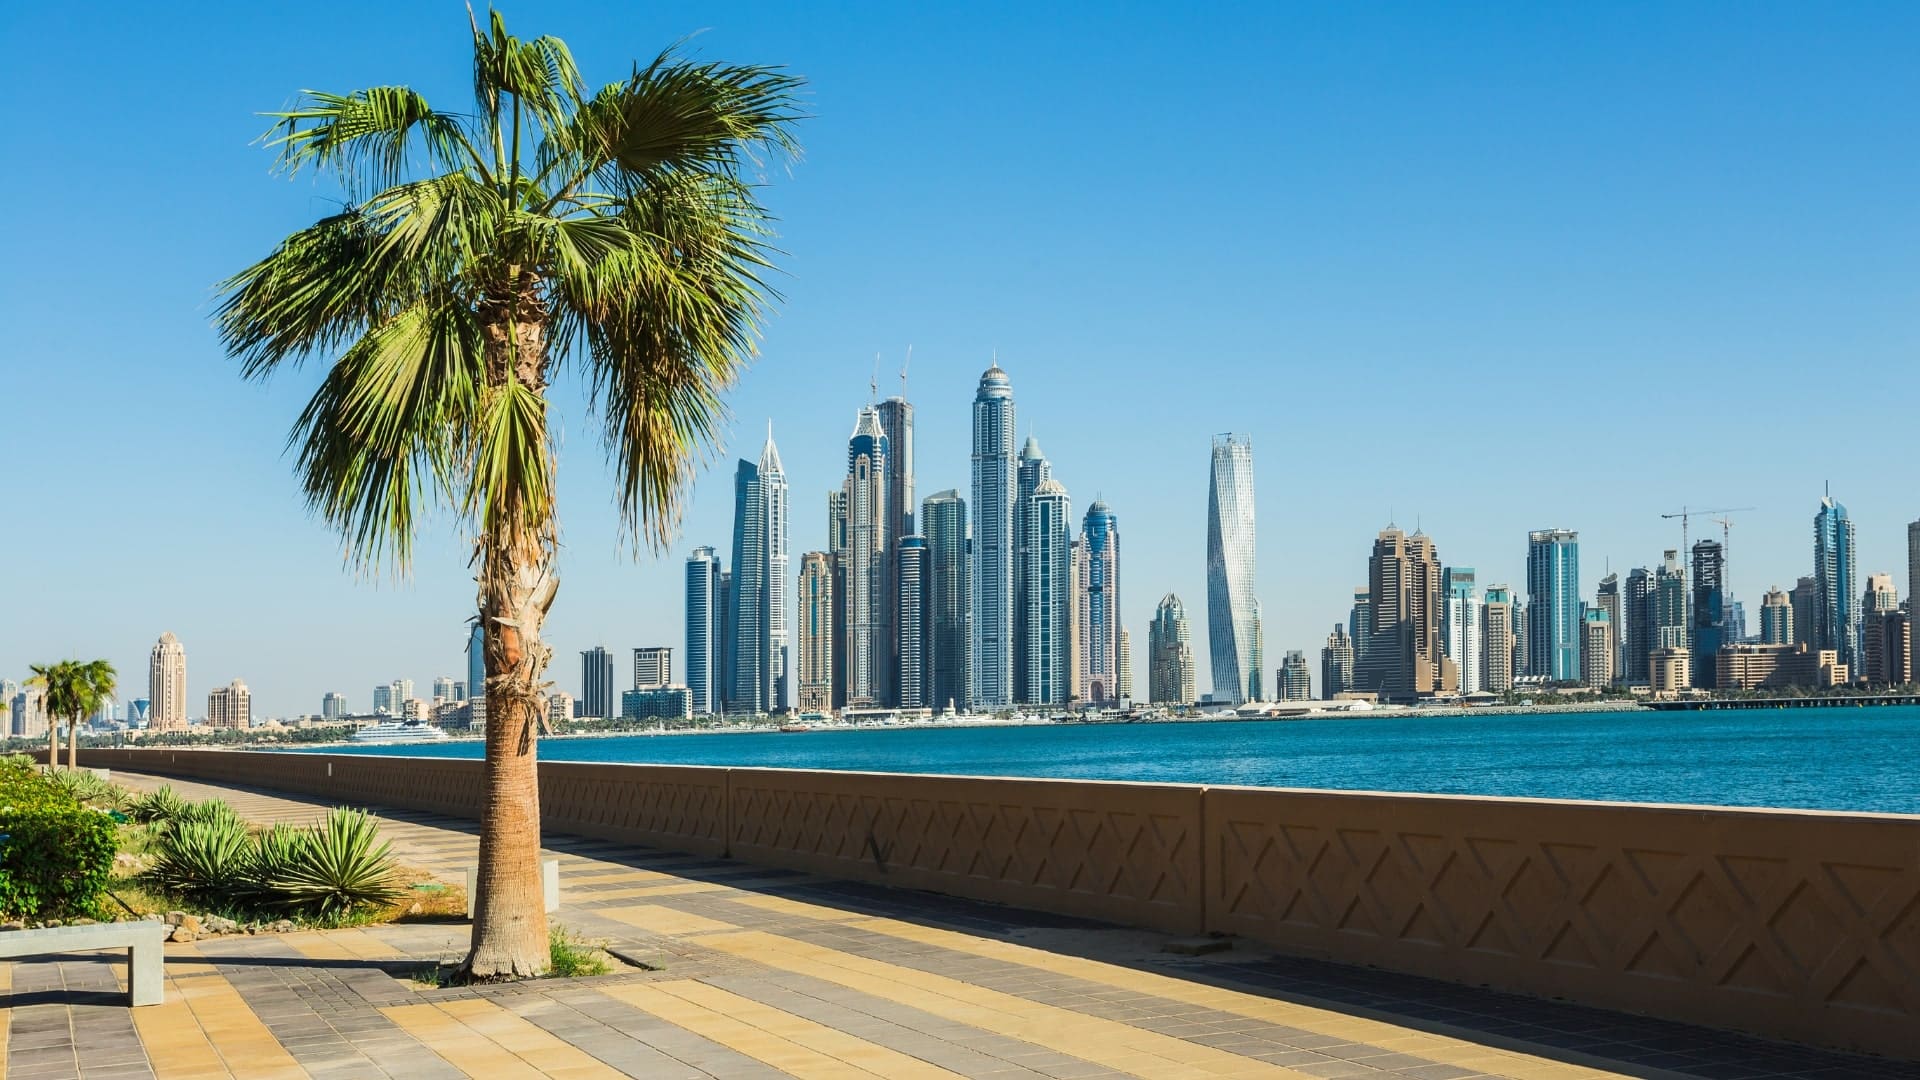 Which Free Zone is the Best in the UAE